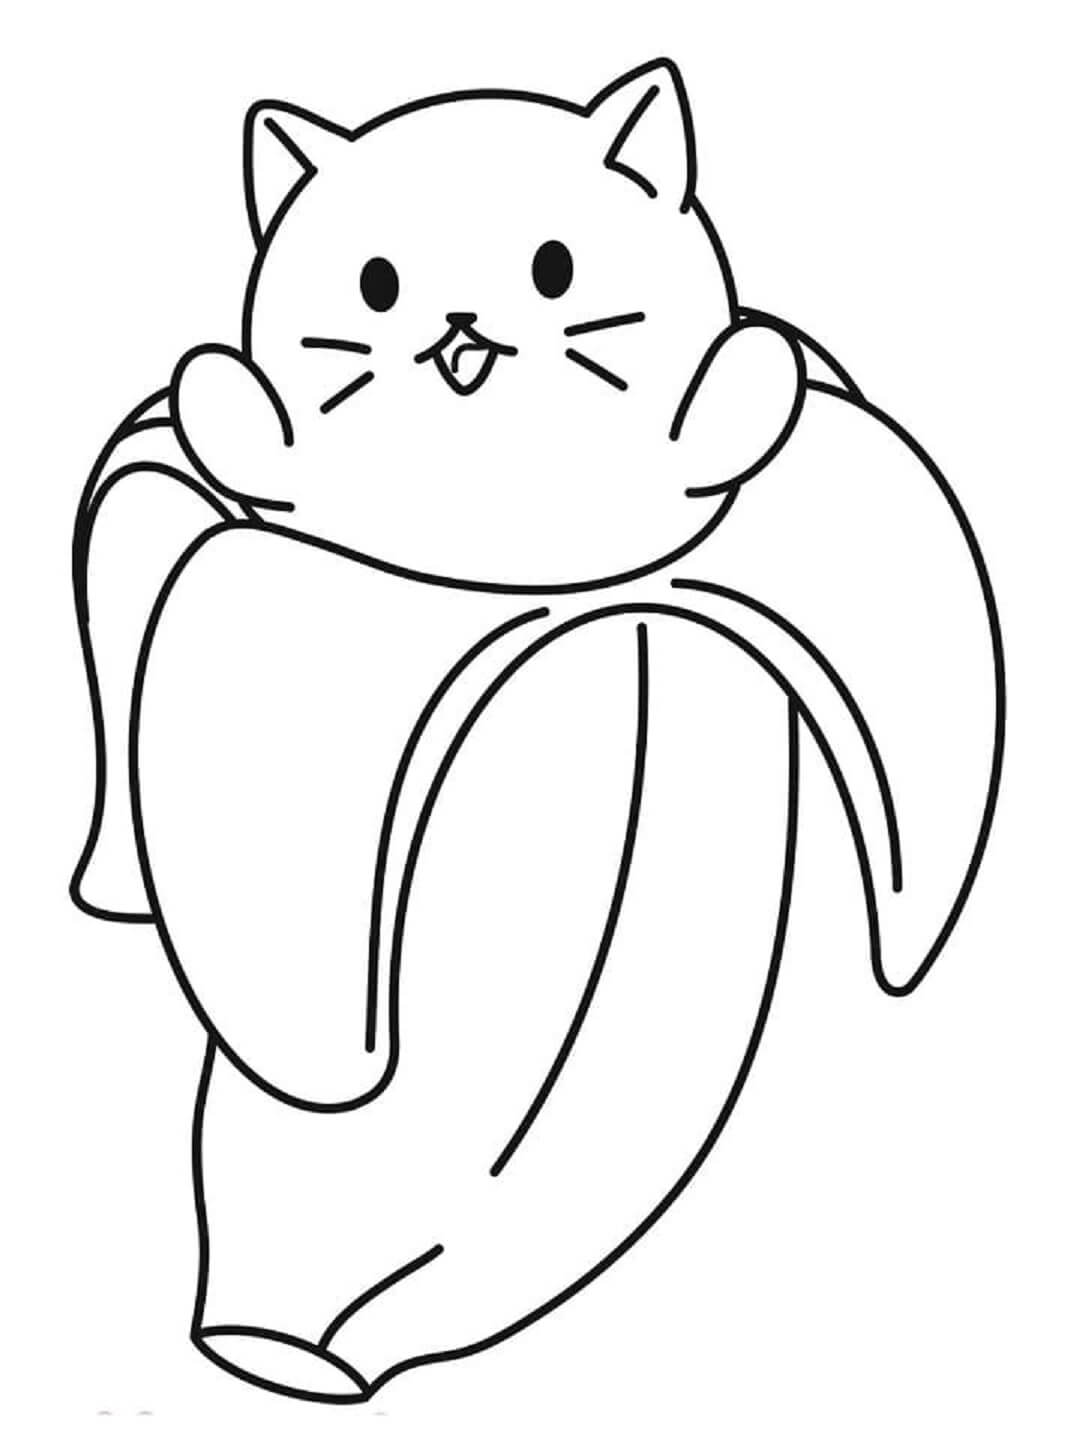 Banana Cat coloring page - Download, Print or Color Online for Free